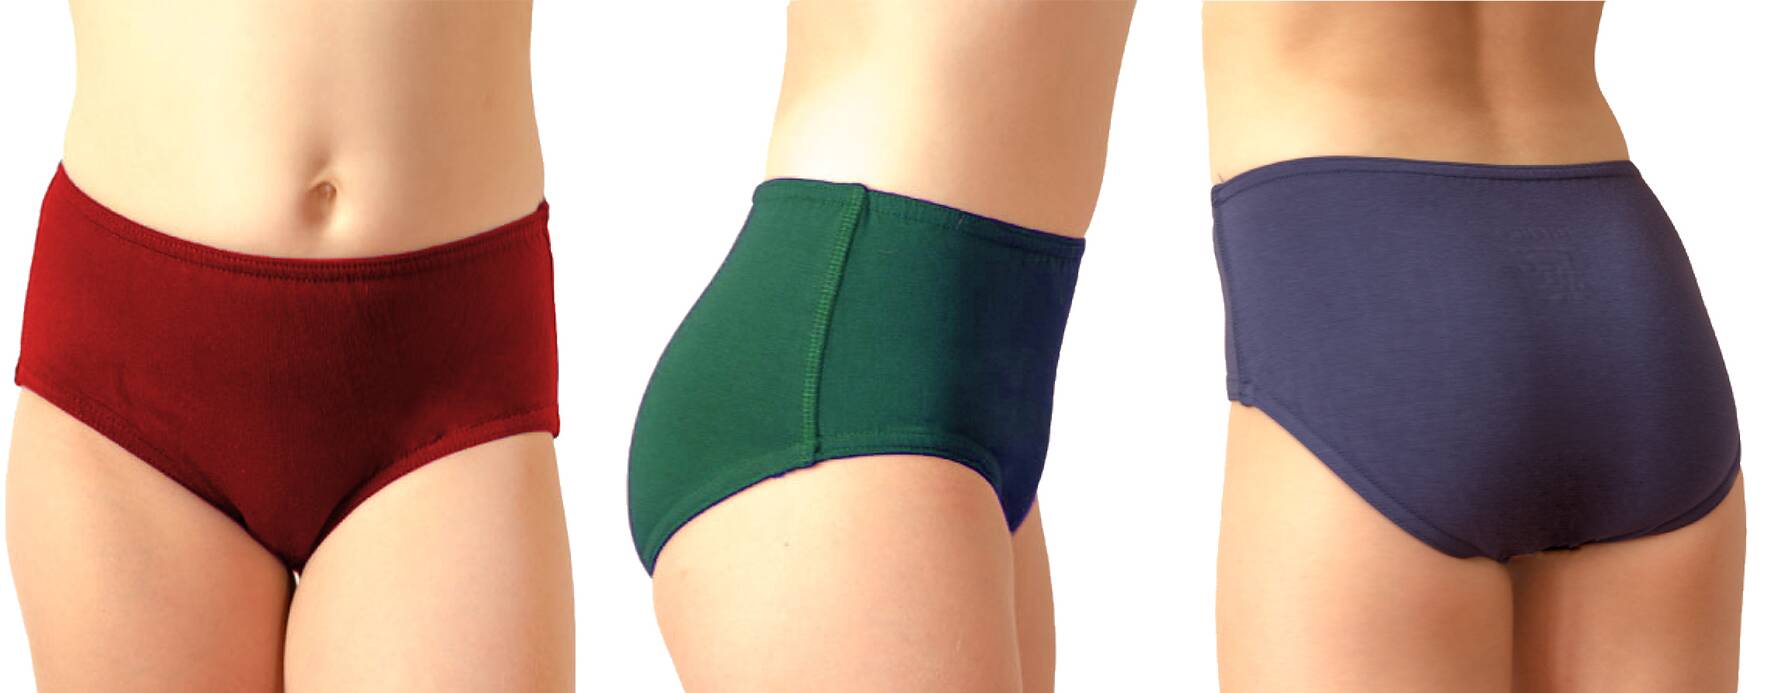 Green sHEROes Girls super comfy, full coverage, school and sport underpants  - sHEROes